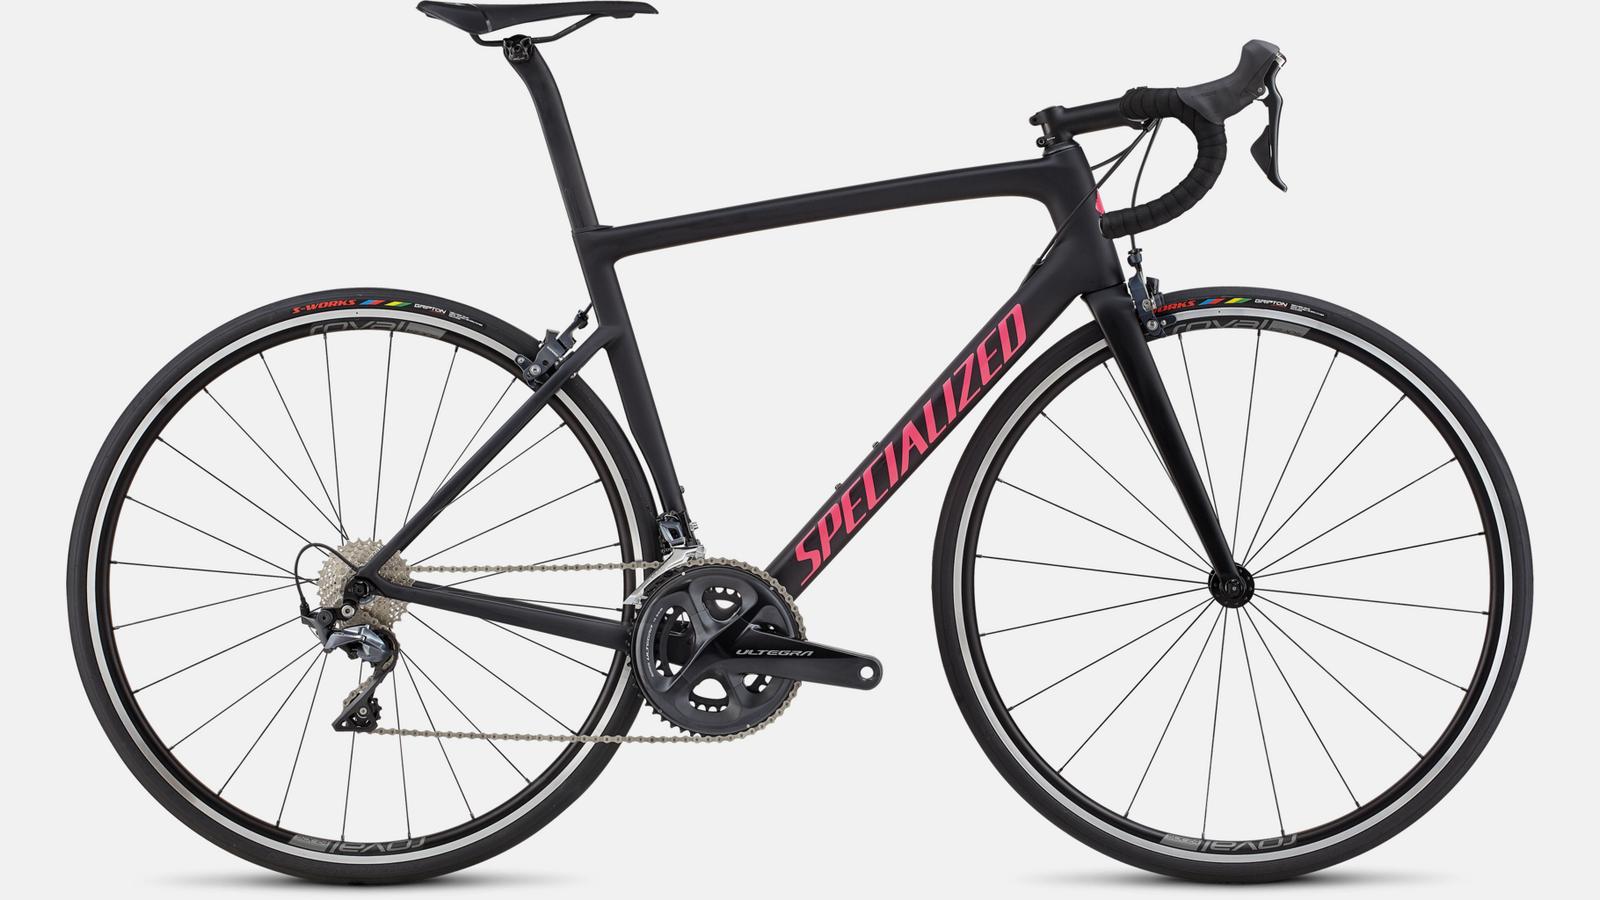 Paint for 2018 Specialized Men's Tarmac Expert - Gloss Black